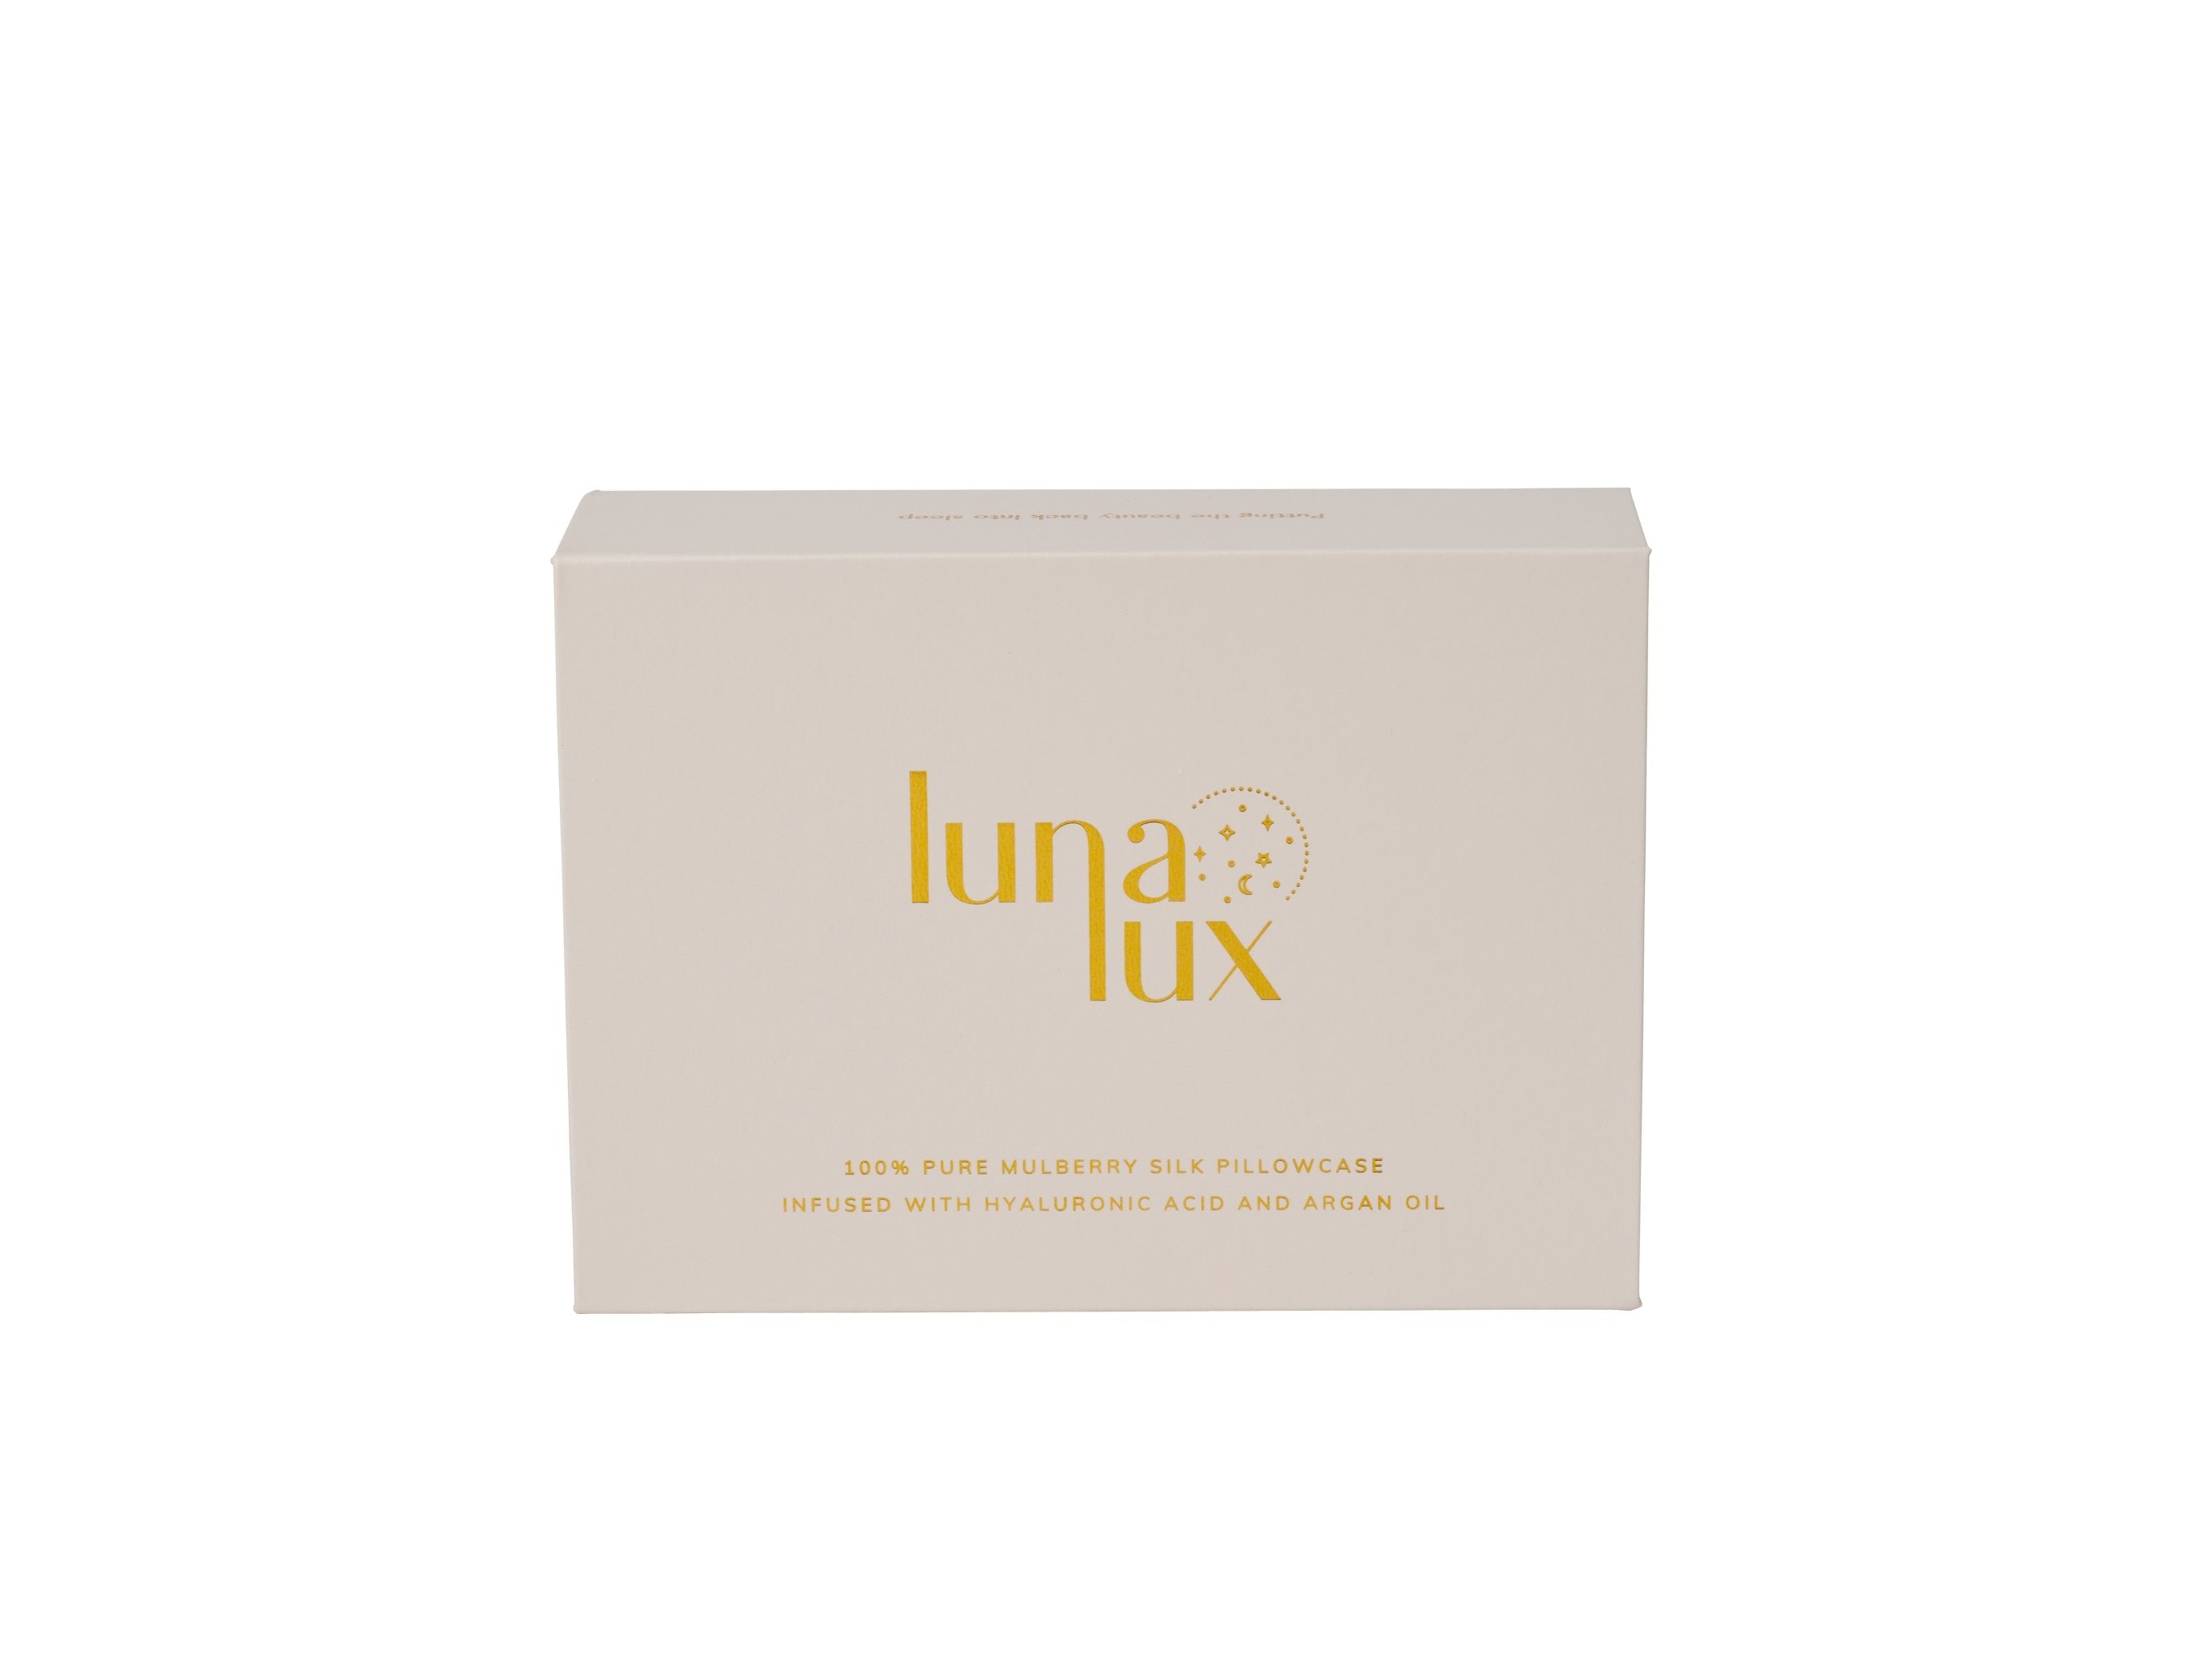 Twin Set Midnight Blue 100% Silk Pillowcase infused with Hyaluronic Acid and Argan Oil. - Lunalux